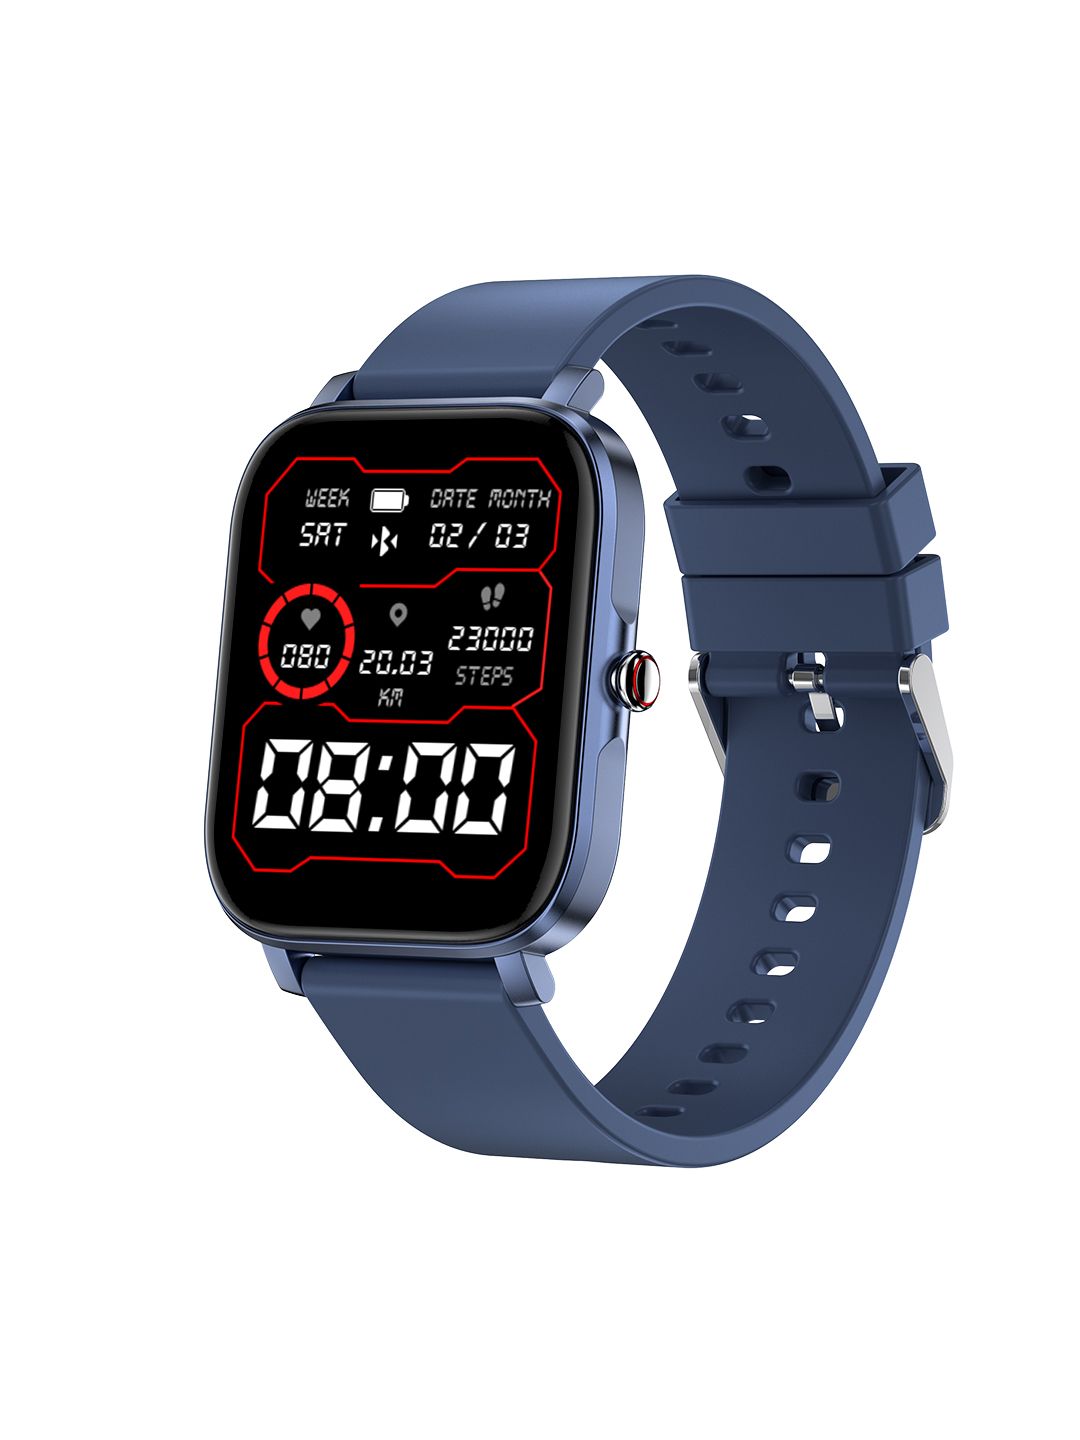 Fire-Boltt Ninja 2 Plus Ultra-Thin Smartwatch - Blue 31BSWAAY Price in India